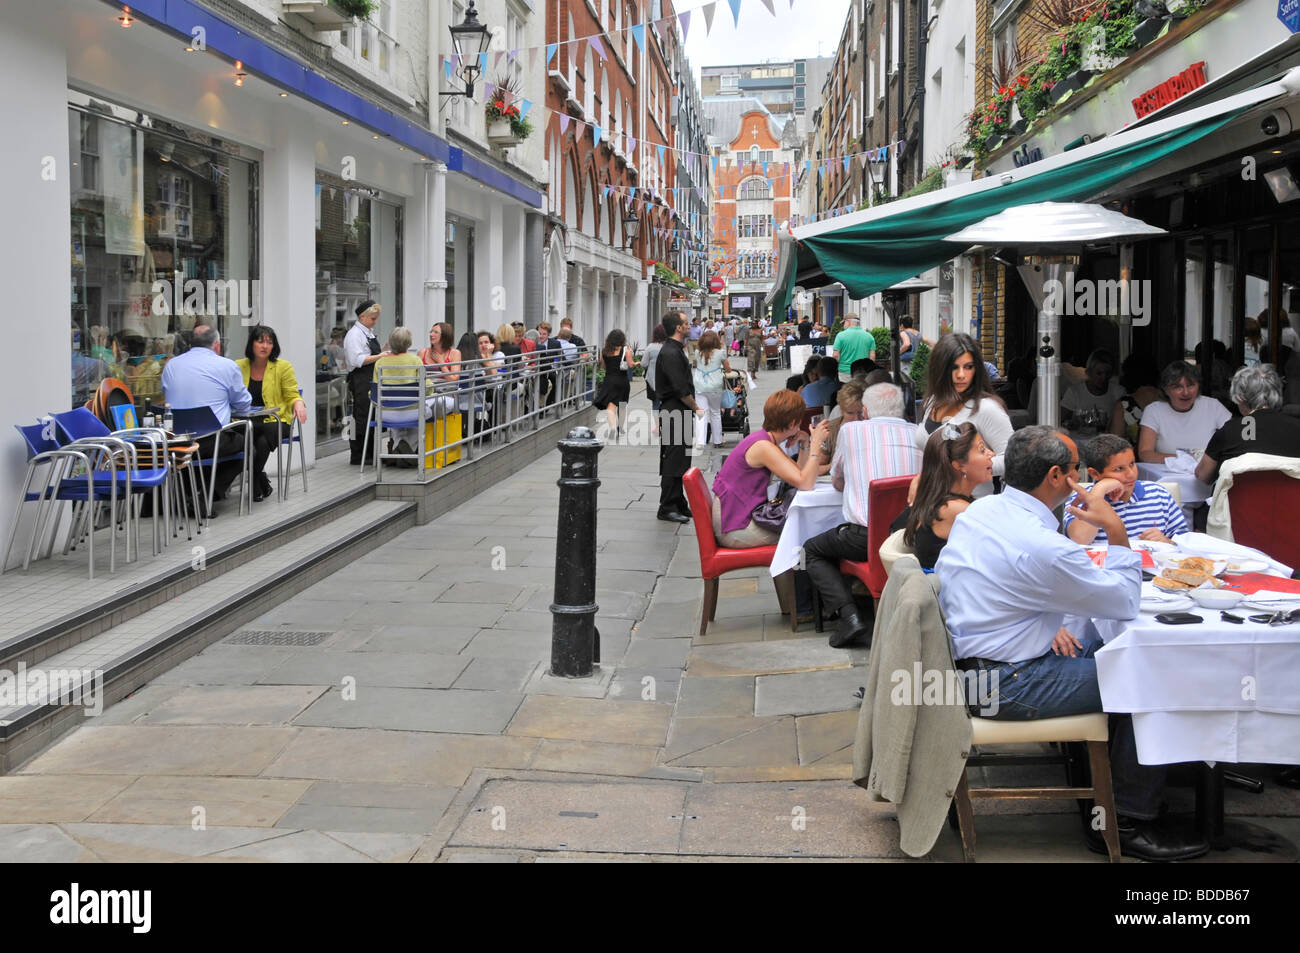 Pavement cafe bars & restaurants in West End of London at St Christophers Place just off Oxford Street Stock Photo